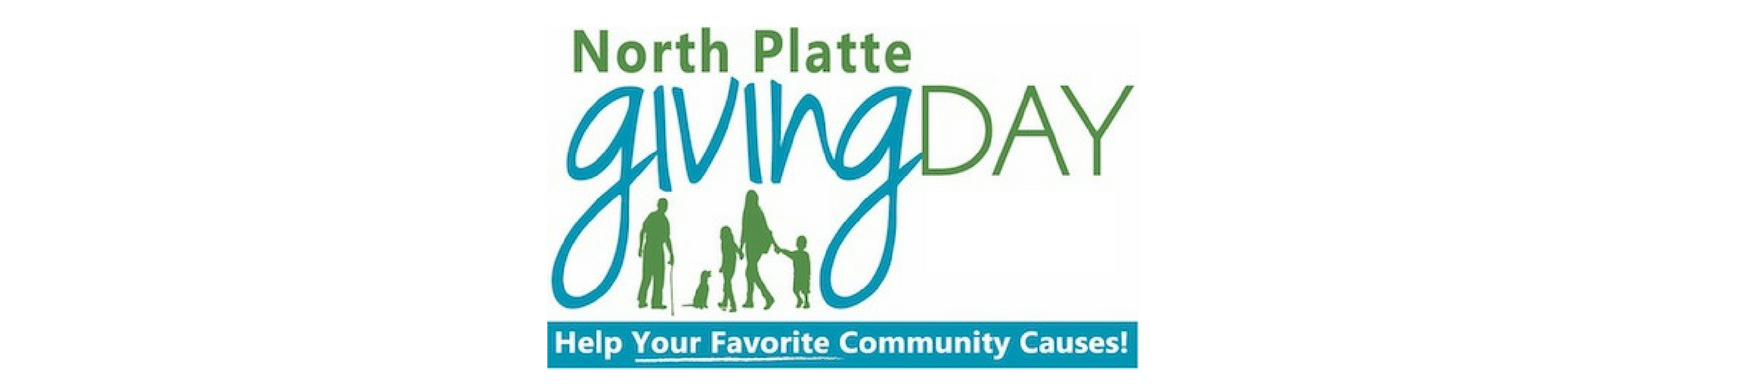 North Platte Giving Day 2022 raises $423,138 for local nonprofits 